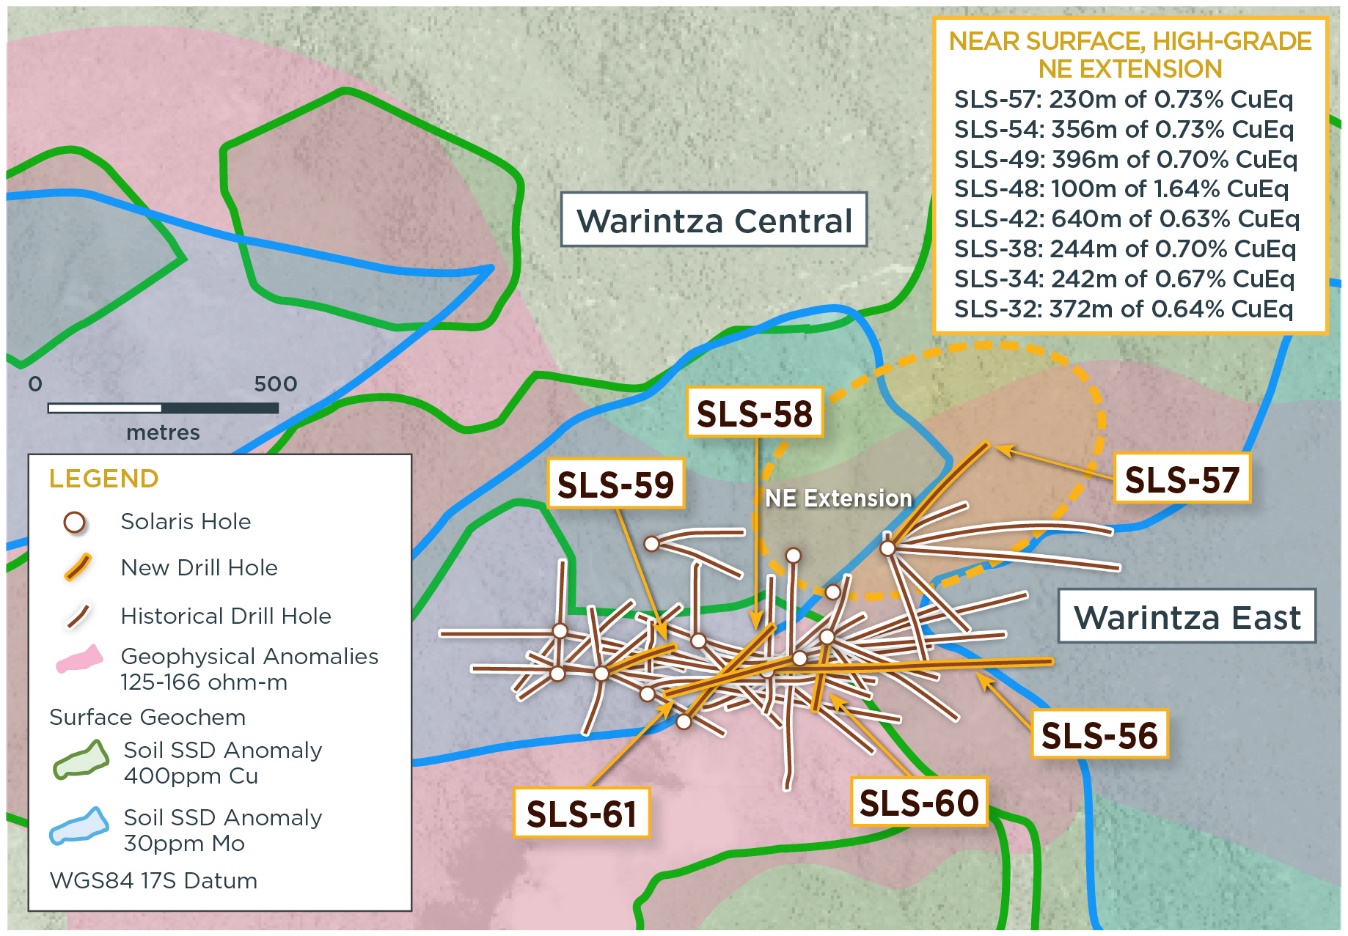 Plan View of Warintza Central Drilling Released to Date